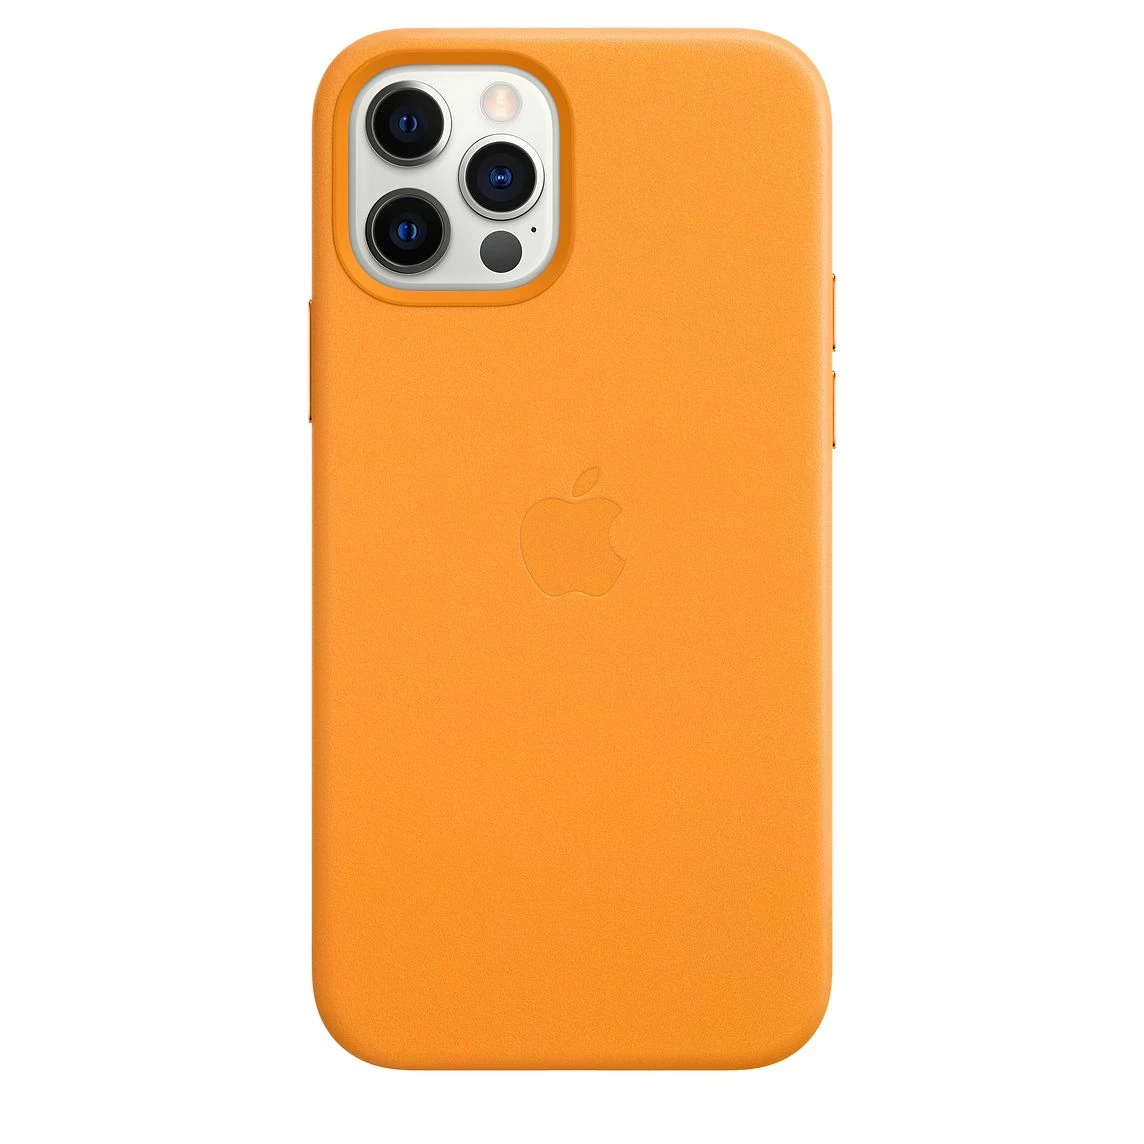 Apple iPhone 12 Pro Max Leather Case with MagSafe - California Poppy (MHKH3)